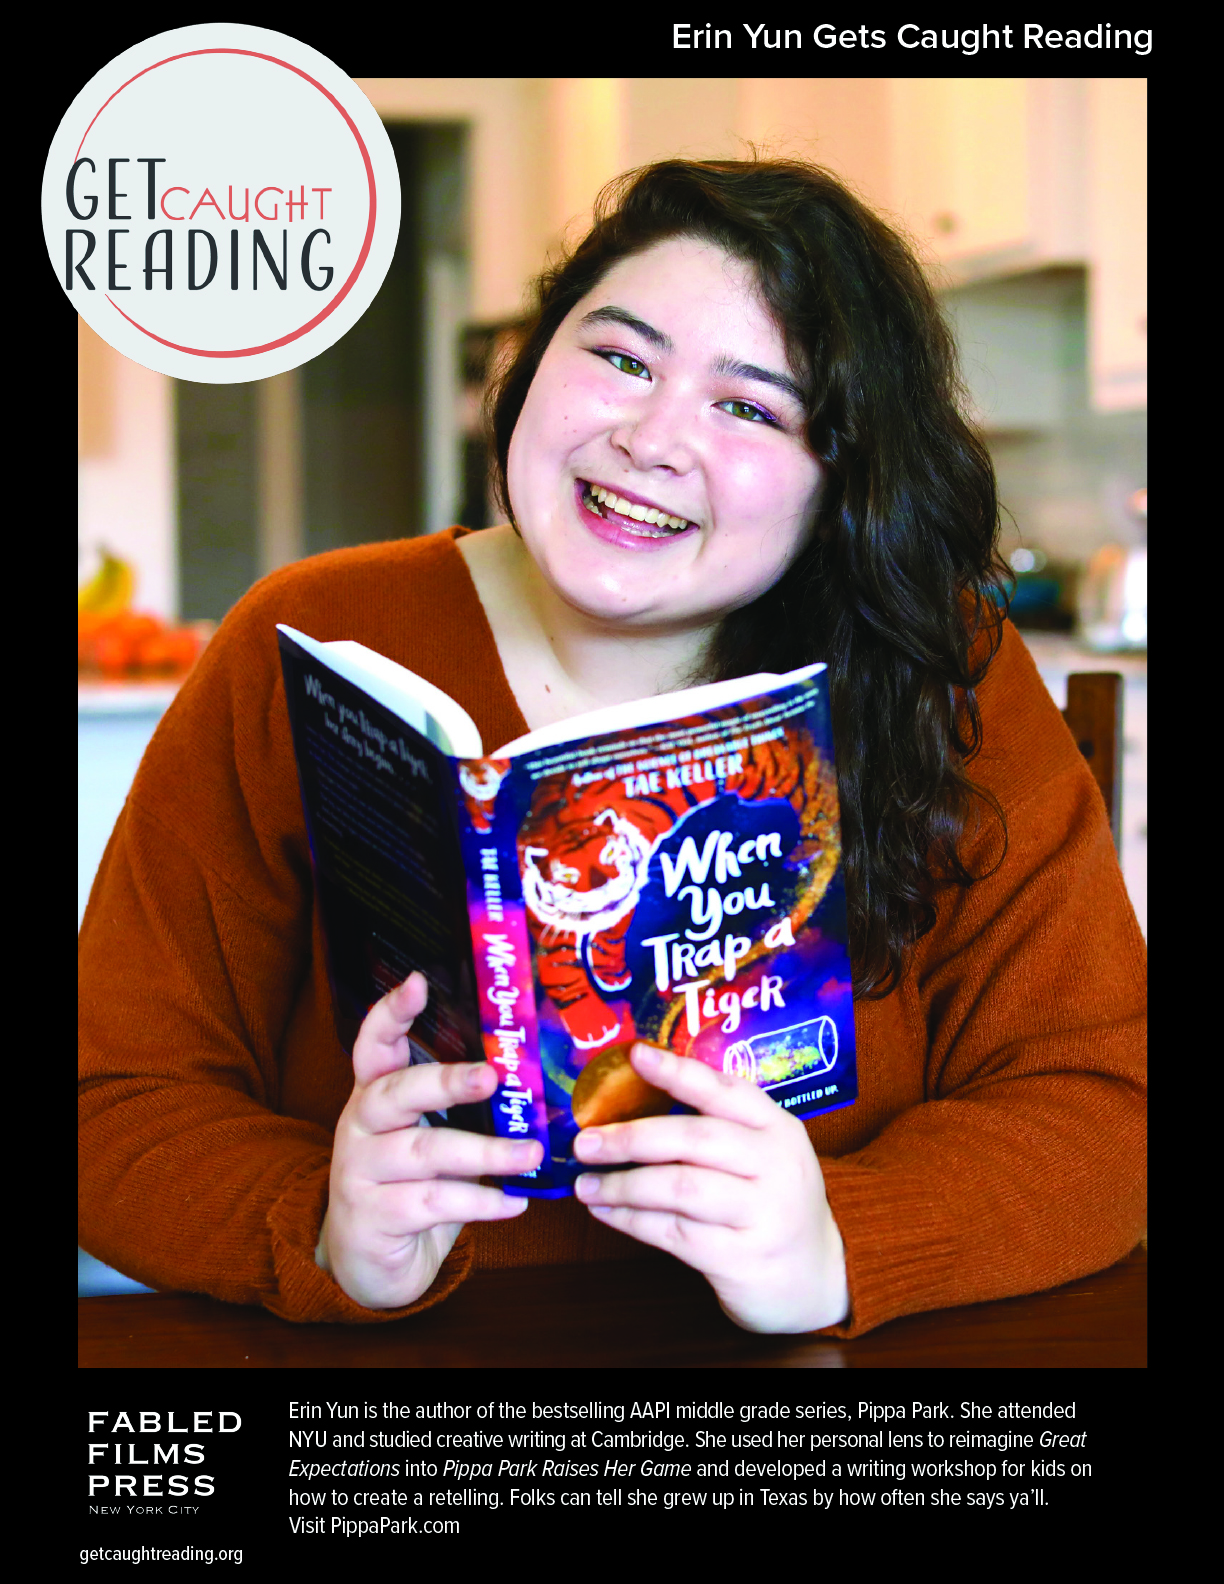 Erin Yun's Get Caught Reading Poster shows Erin Yun, the author of Pippa Park, is holding up a copy of When You Trap a Tiger by Newbery Medal writer Tae Keller.